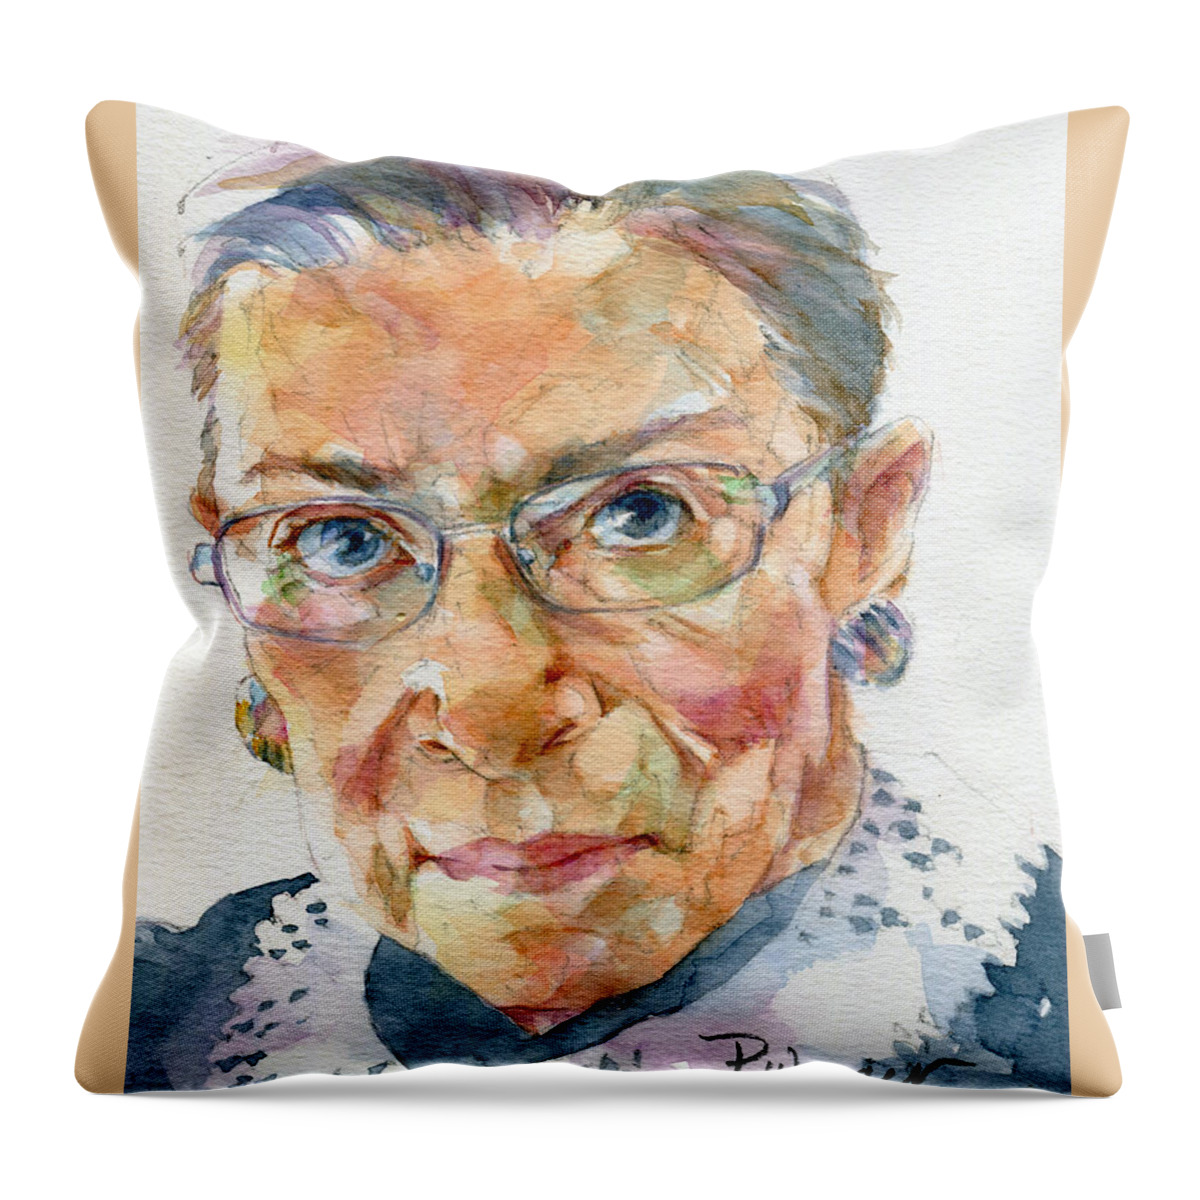 Ruth Bader Ginsburg Throw Pillow featuring the painting Ruth Bader Ginsburg Tribute by Pam Wenger